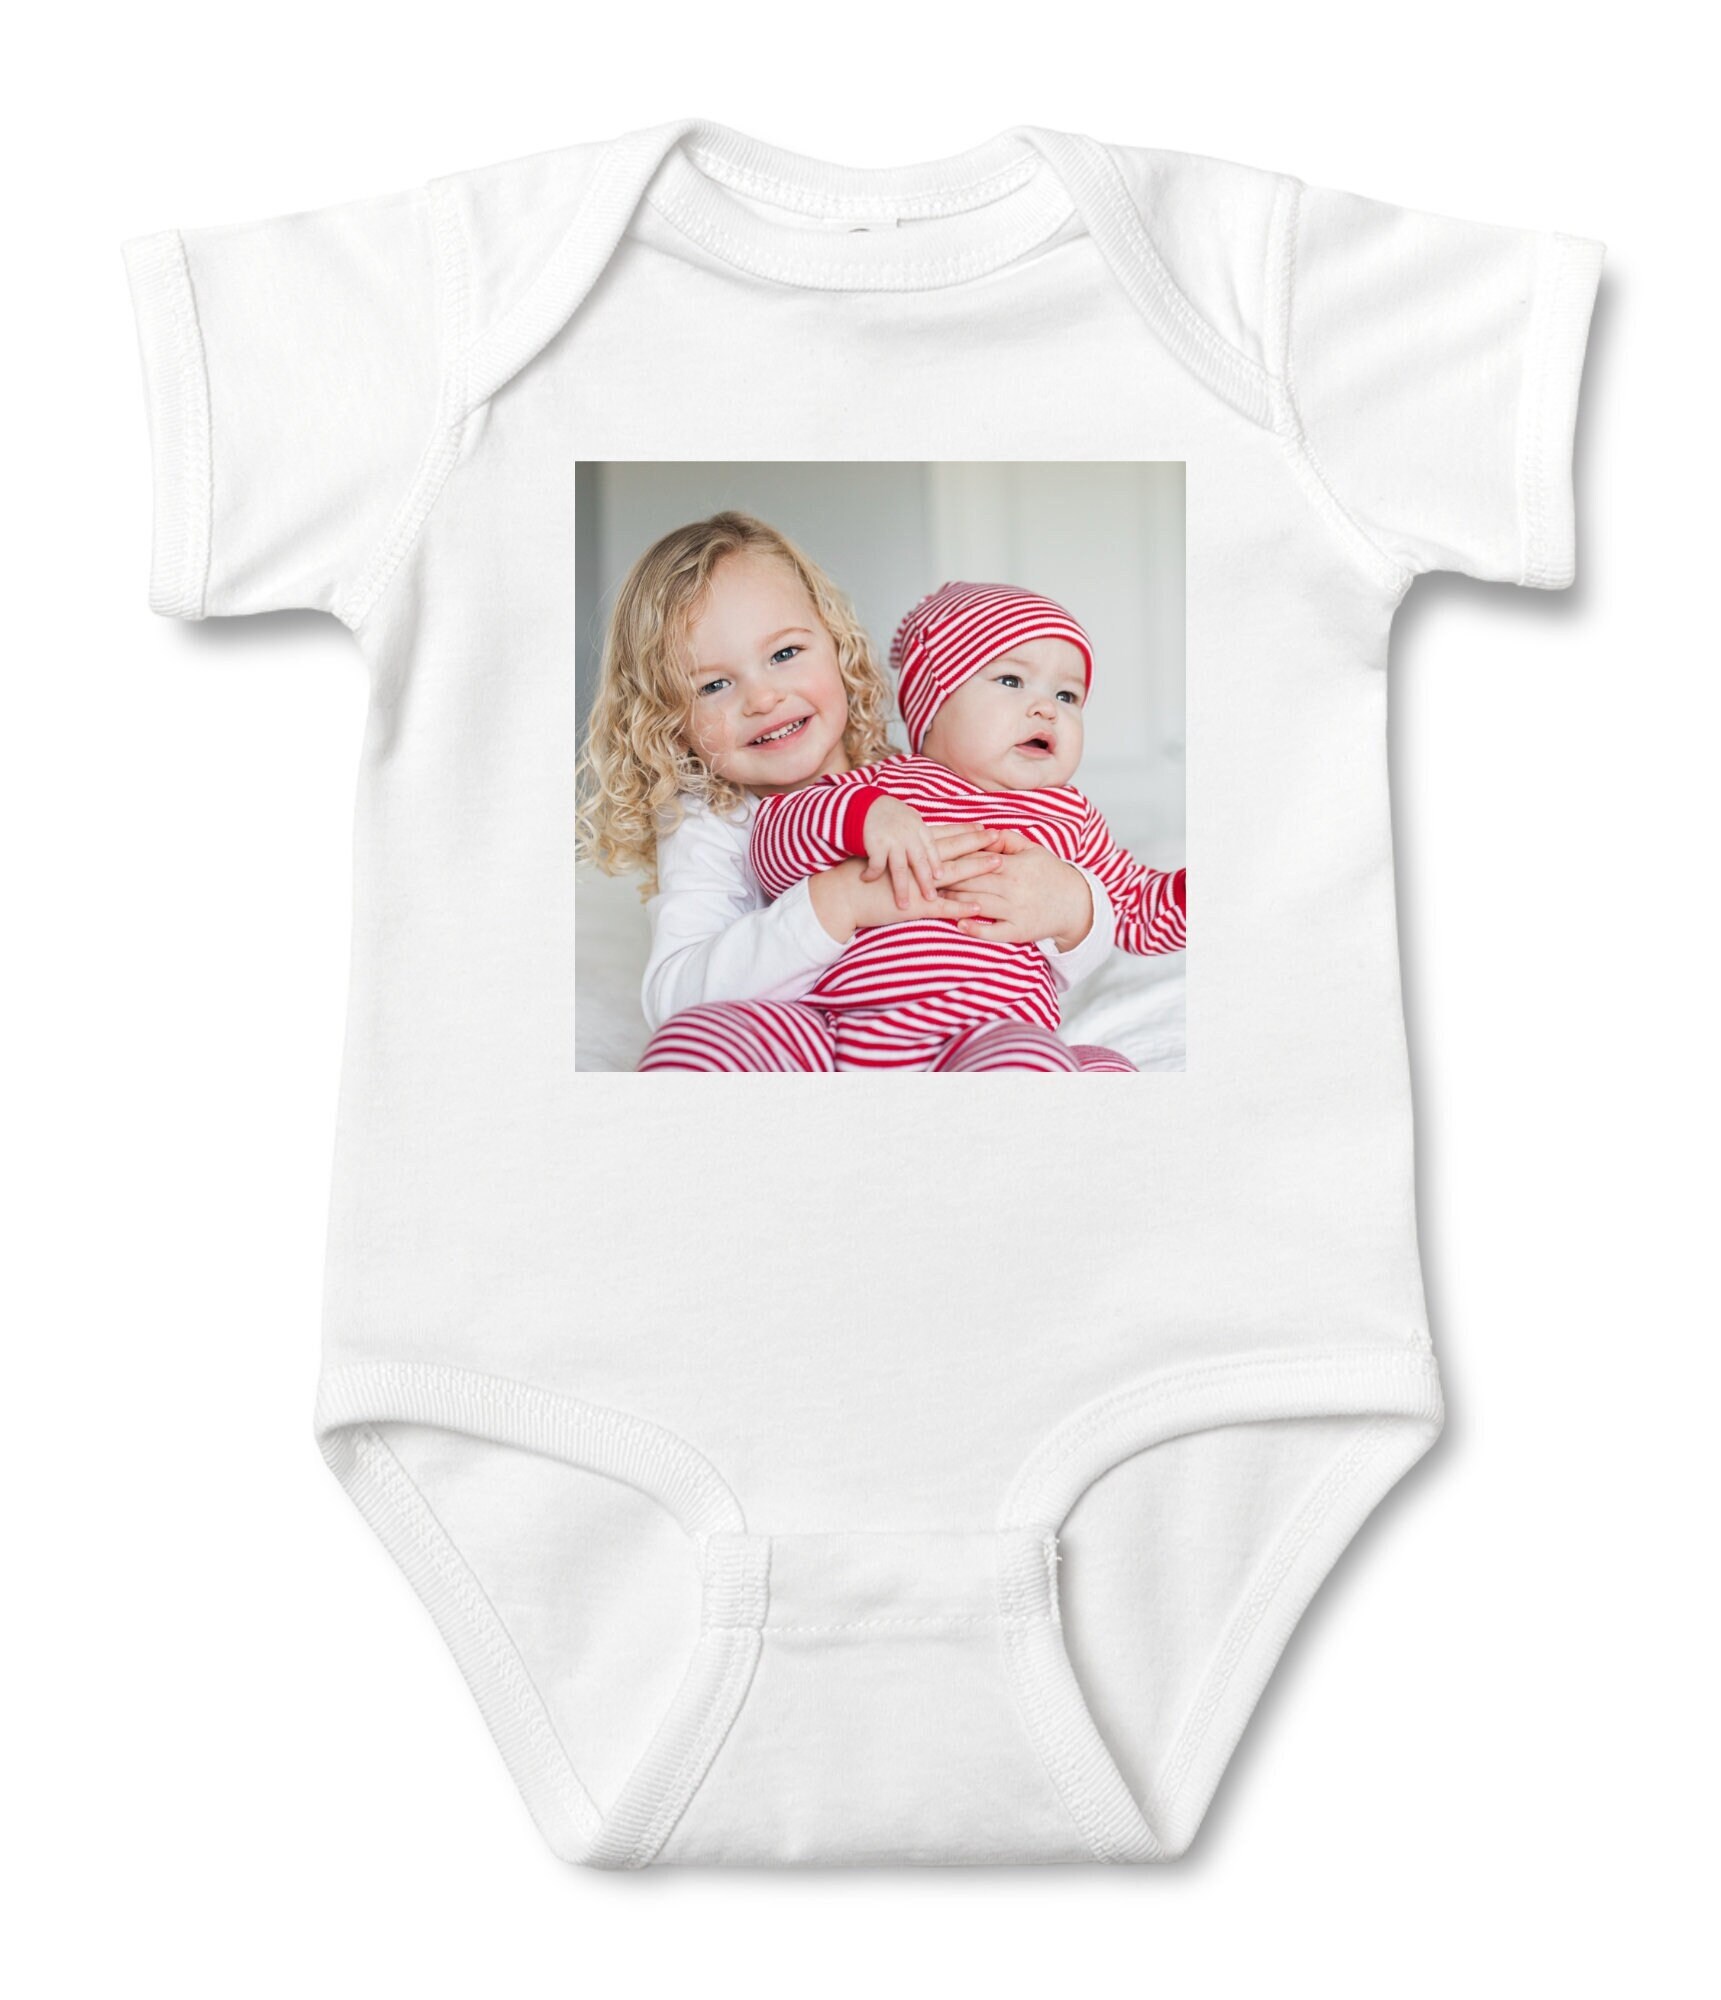 Custom Baby Clothing with Family Photos – Personalized Photo Short-Sleeve Baby Onesies – Infant Bodysuit – Best Toddler T-Shirt for Baby